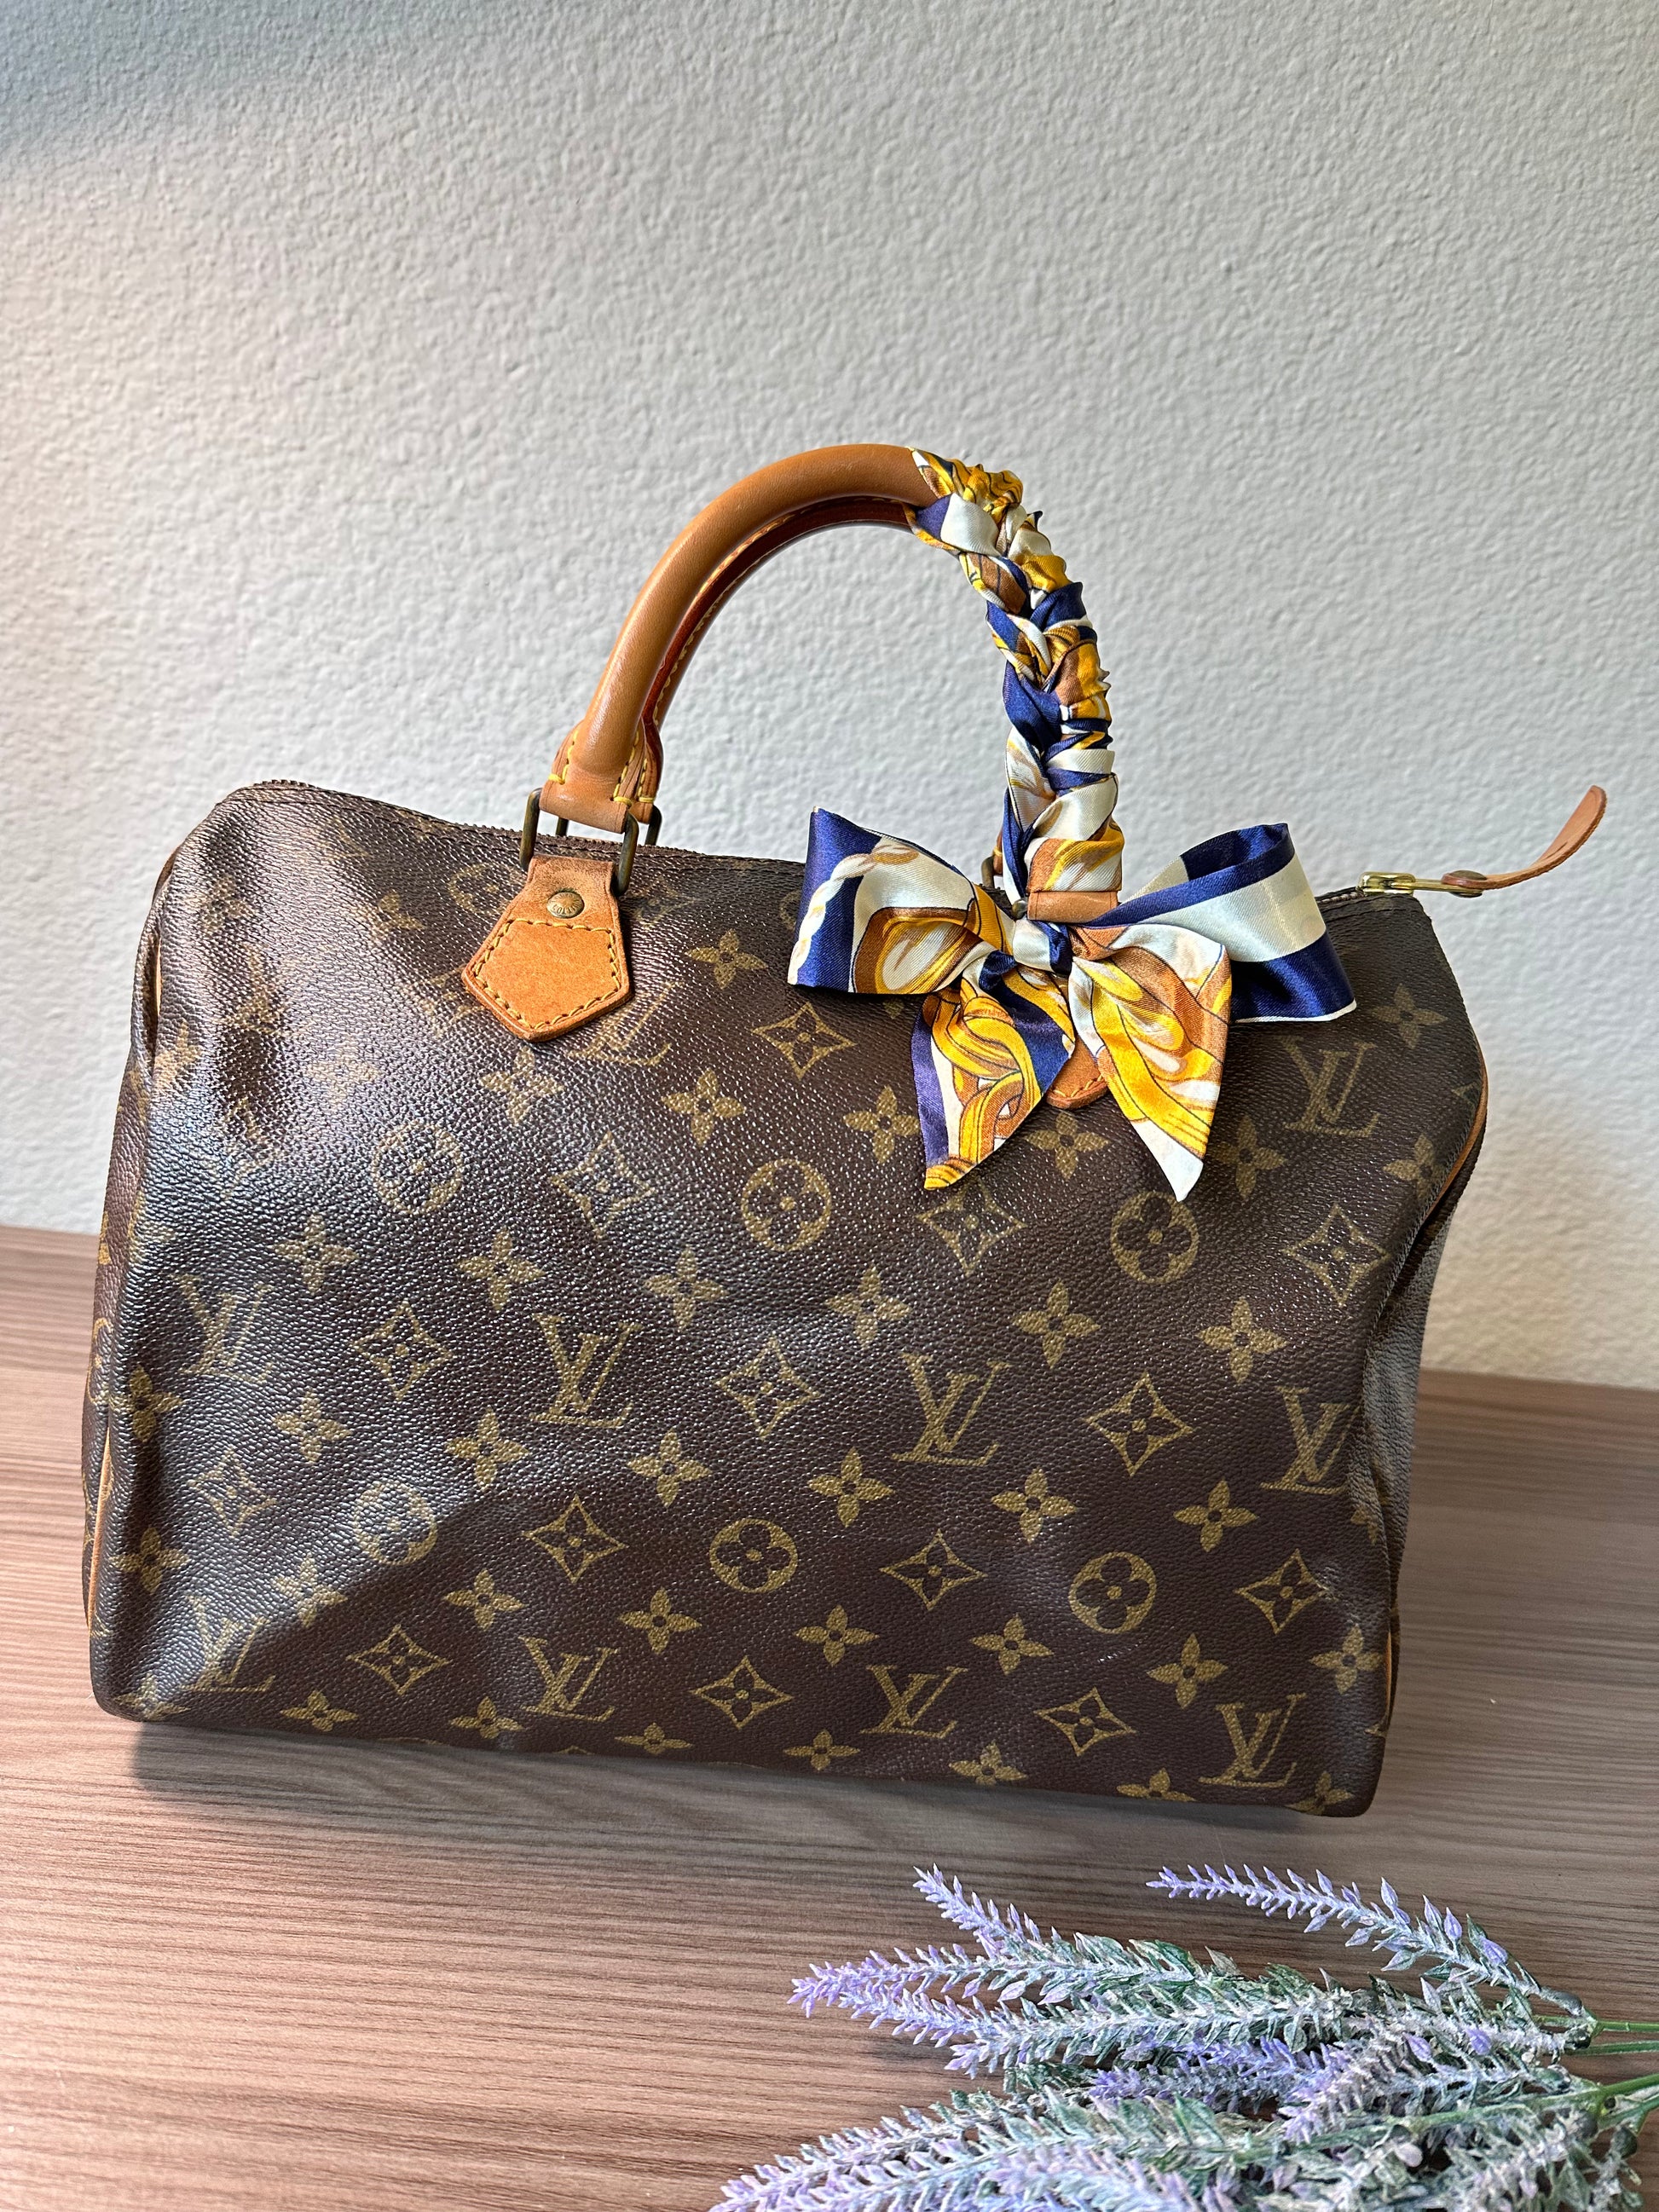 authentic louis vuittons handbags pre owned